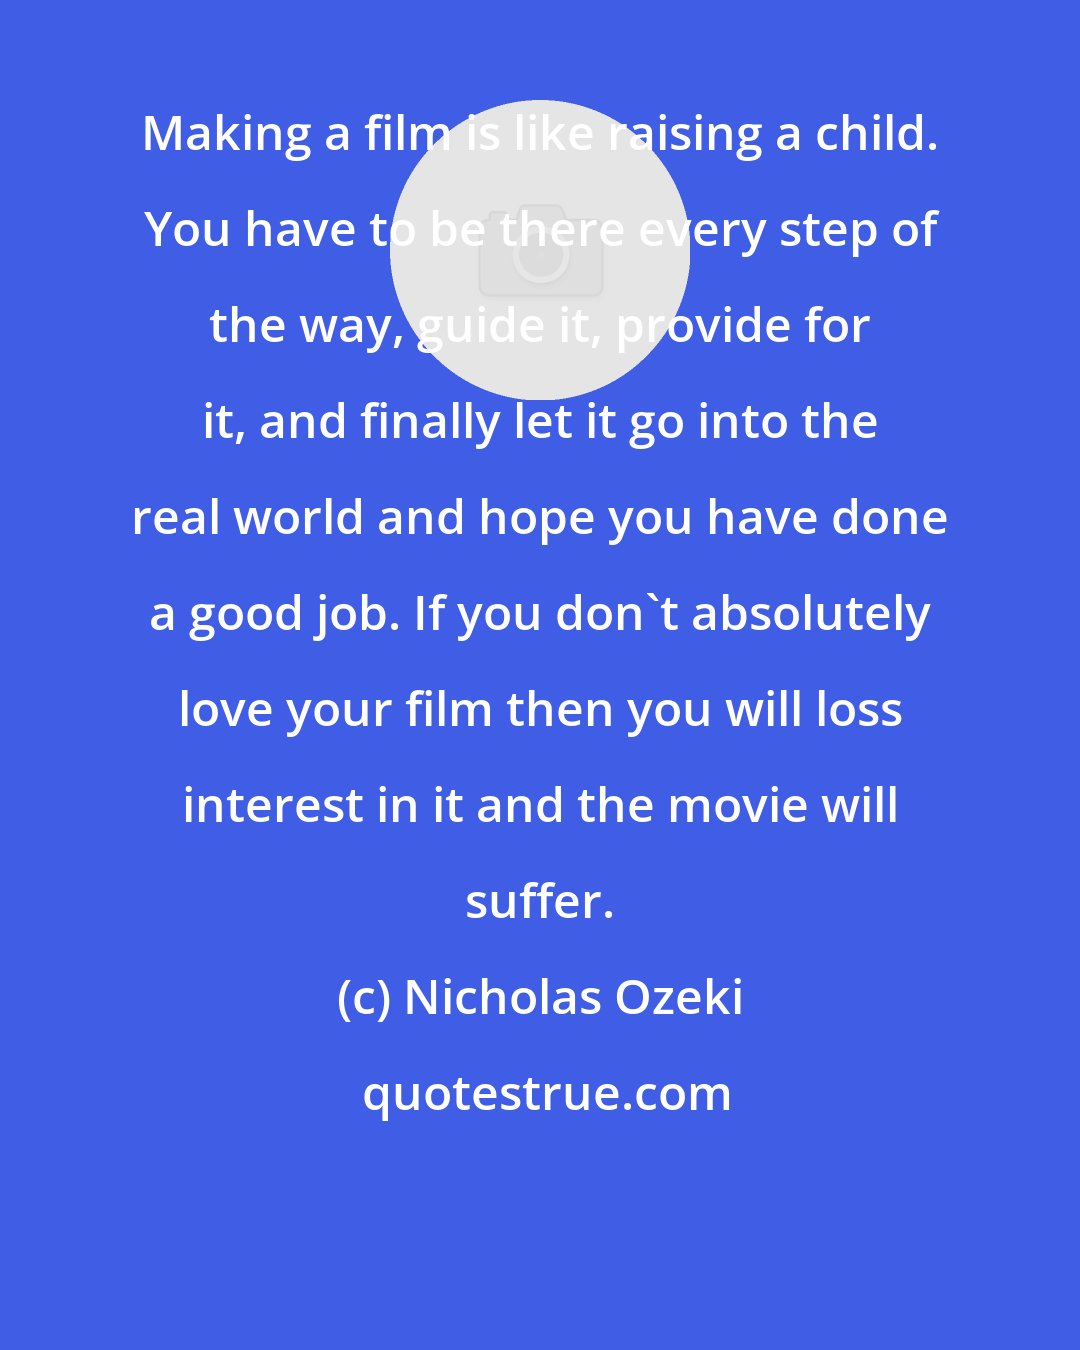 Nicholas Ozeki: Making a film is like raising a child. You have to be there every step of the way, guide it, provide for it, and finally let it go into the real world and hope you have done a good job. If you don't absolutely love your film then you will loss interest in it and the movie will suffer.